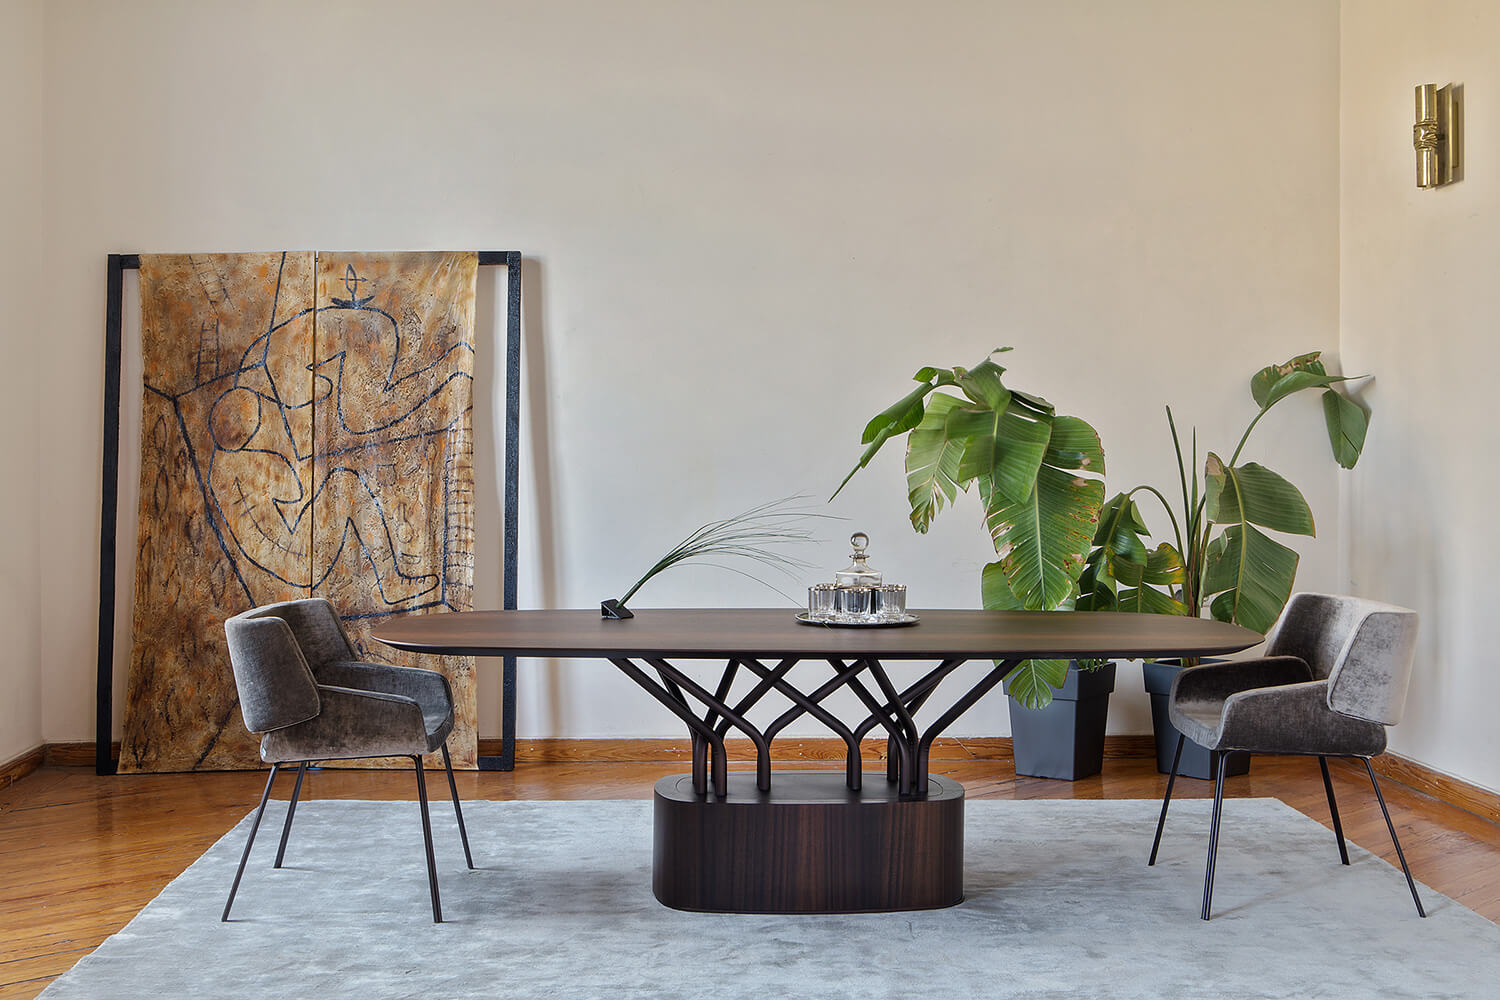 Dining table wood-oo A001 in smoked eucalyptus and mob chair. al2, art for living